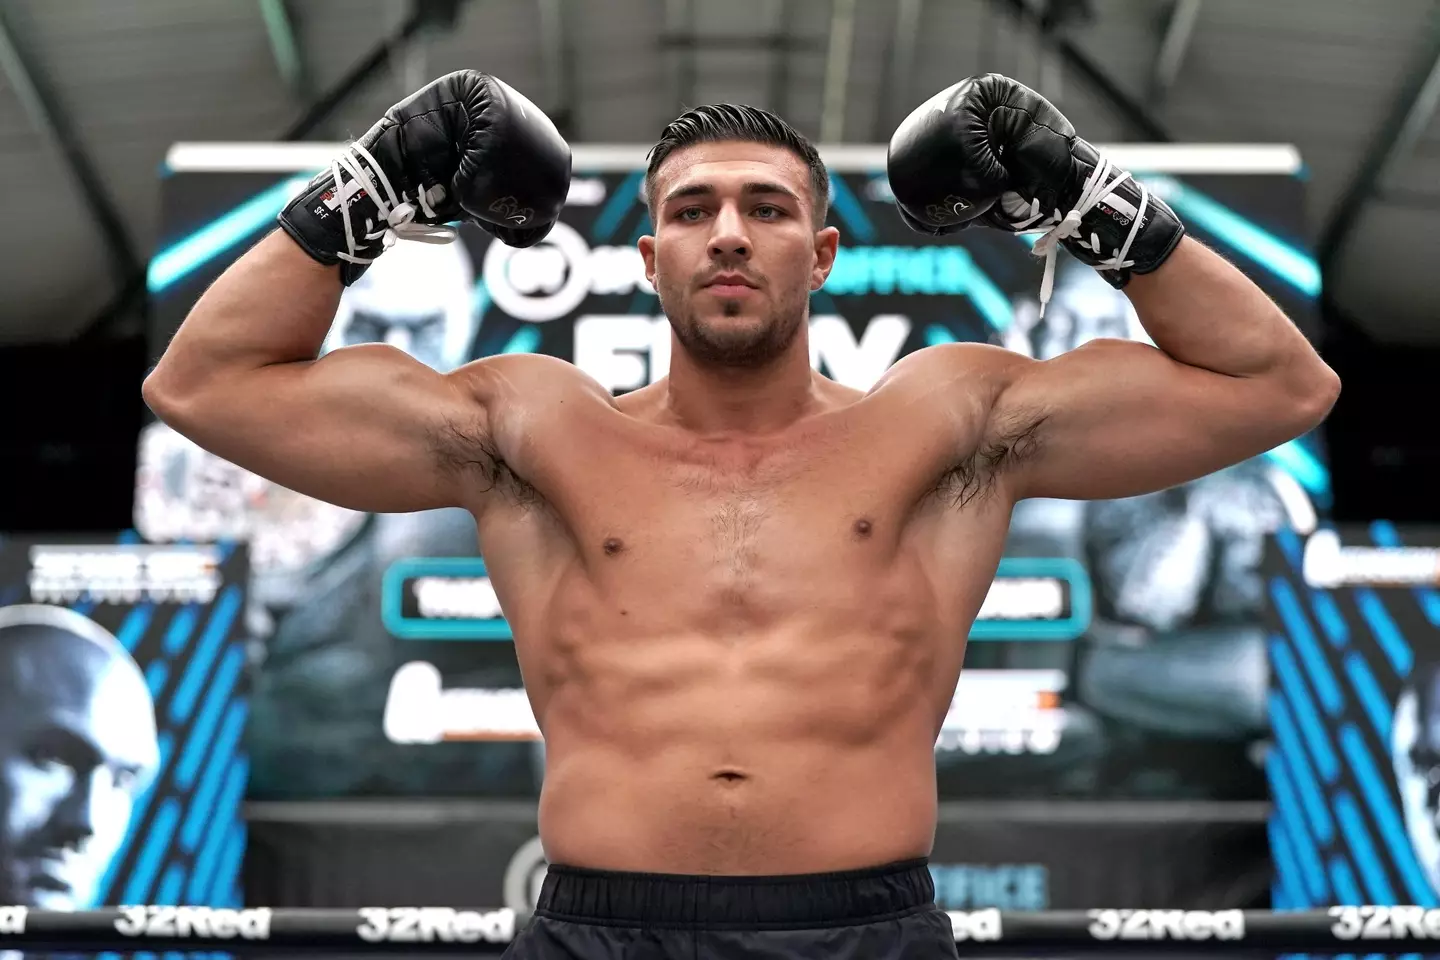 Tommy Fury managed to take home the glory in his boxing match against Jake Paul.